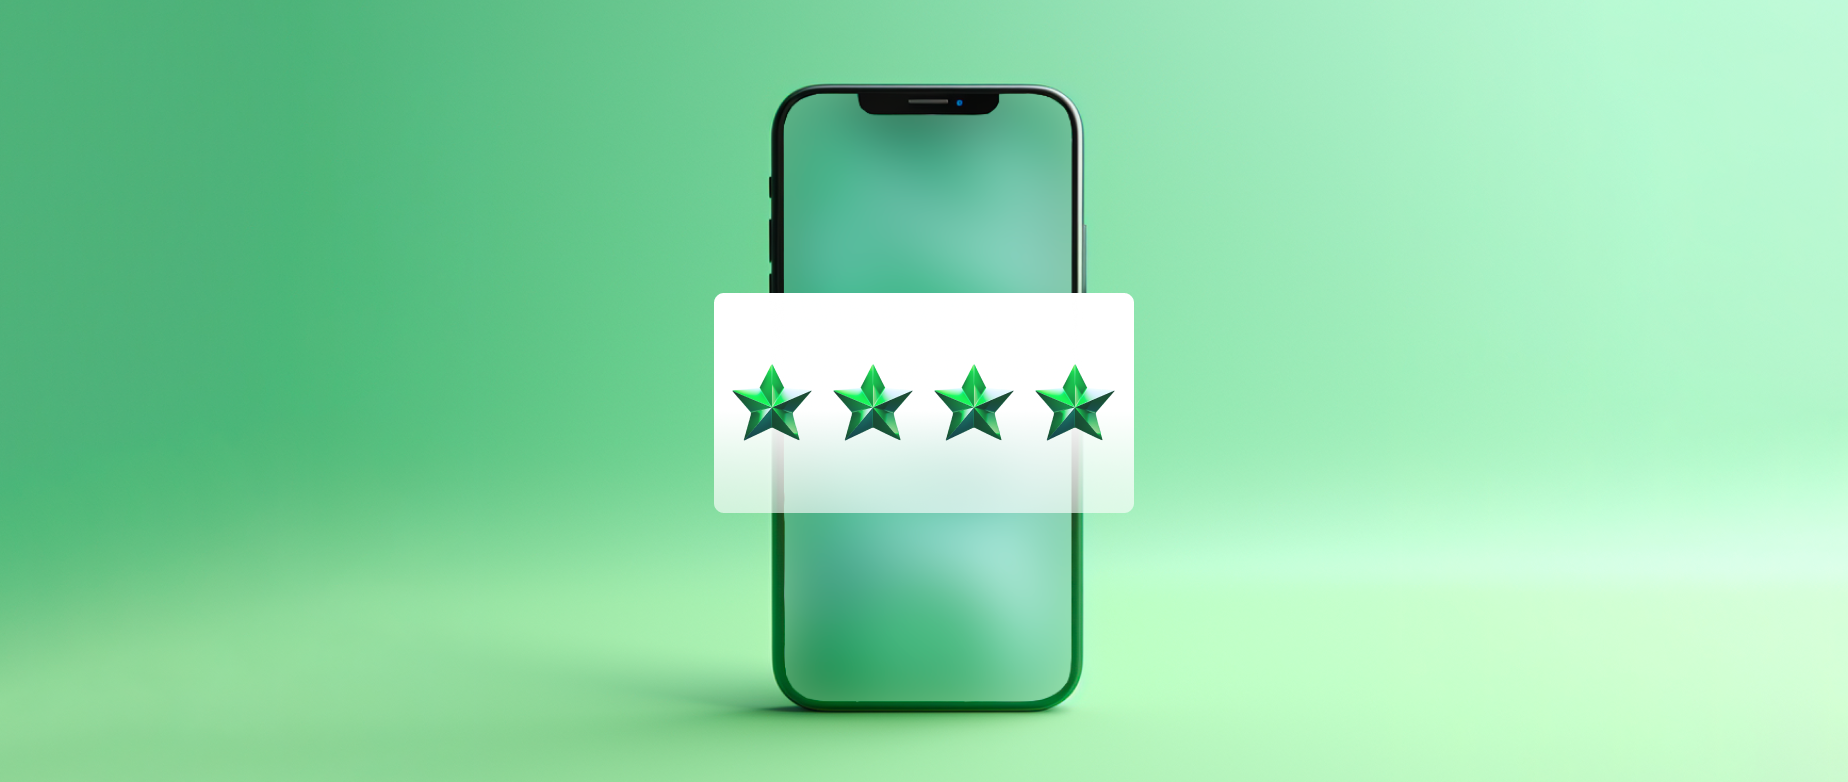 a smartphone with 5 stars in front of it: earned media